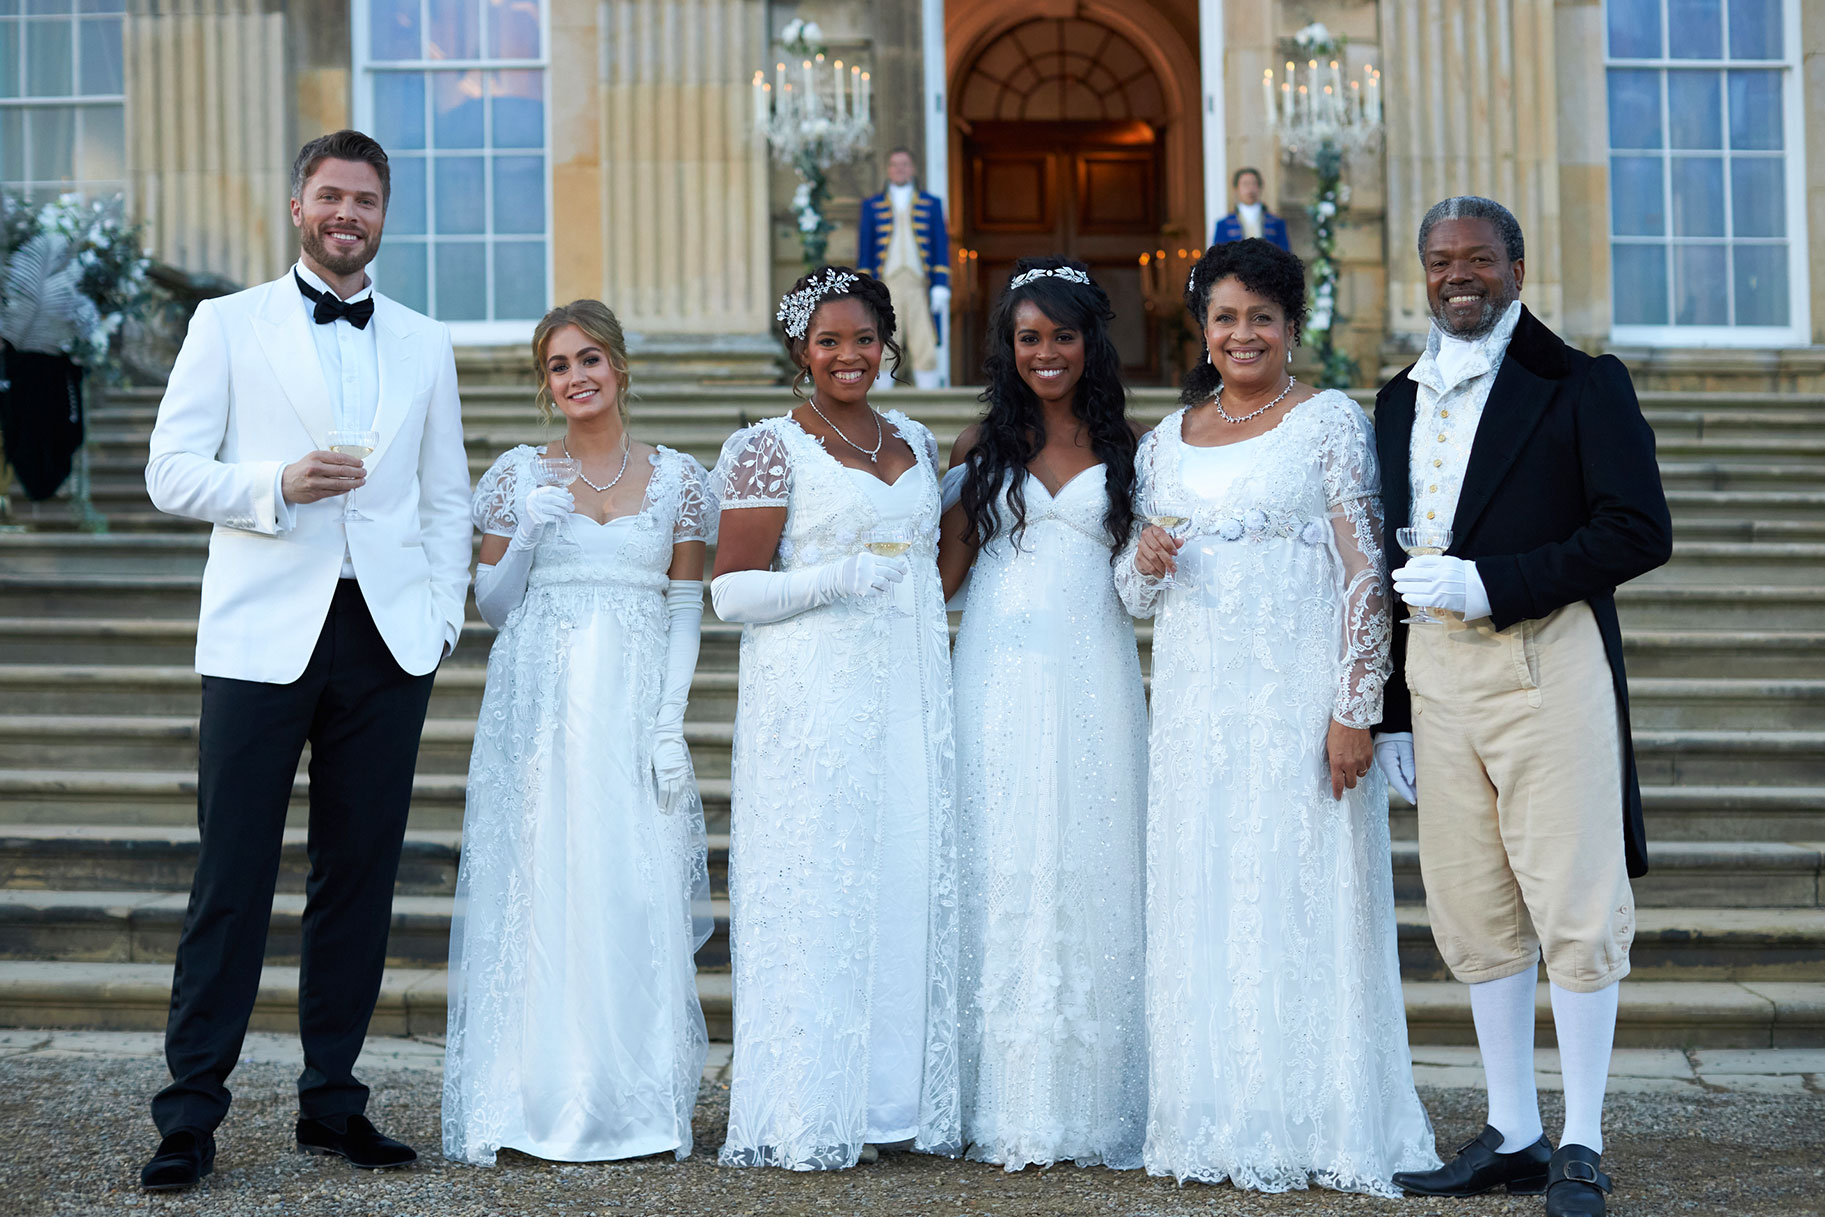 Nicoel Remy with her parents, sister, and friends, all dressed in white standing outside of the castle